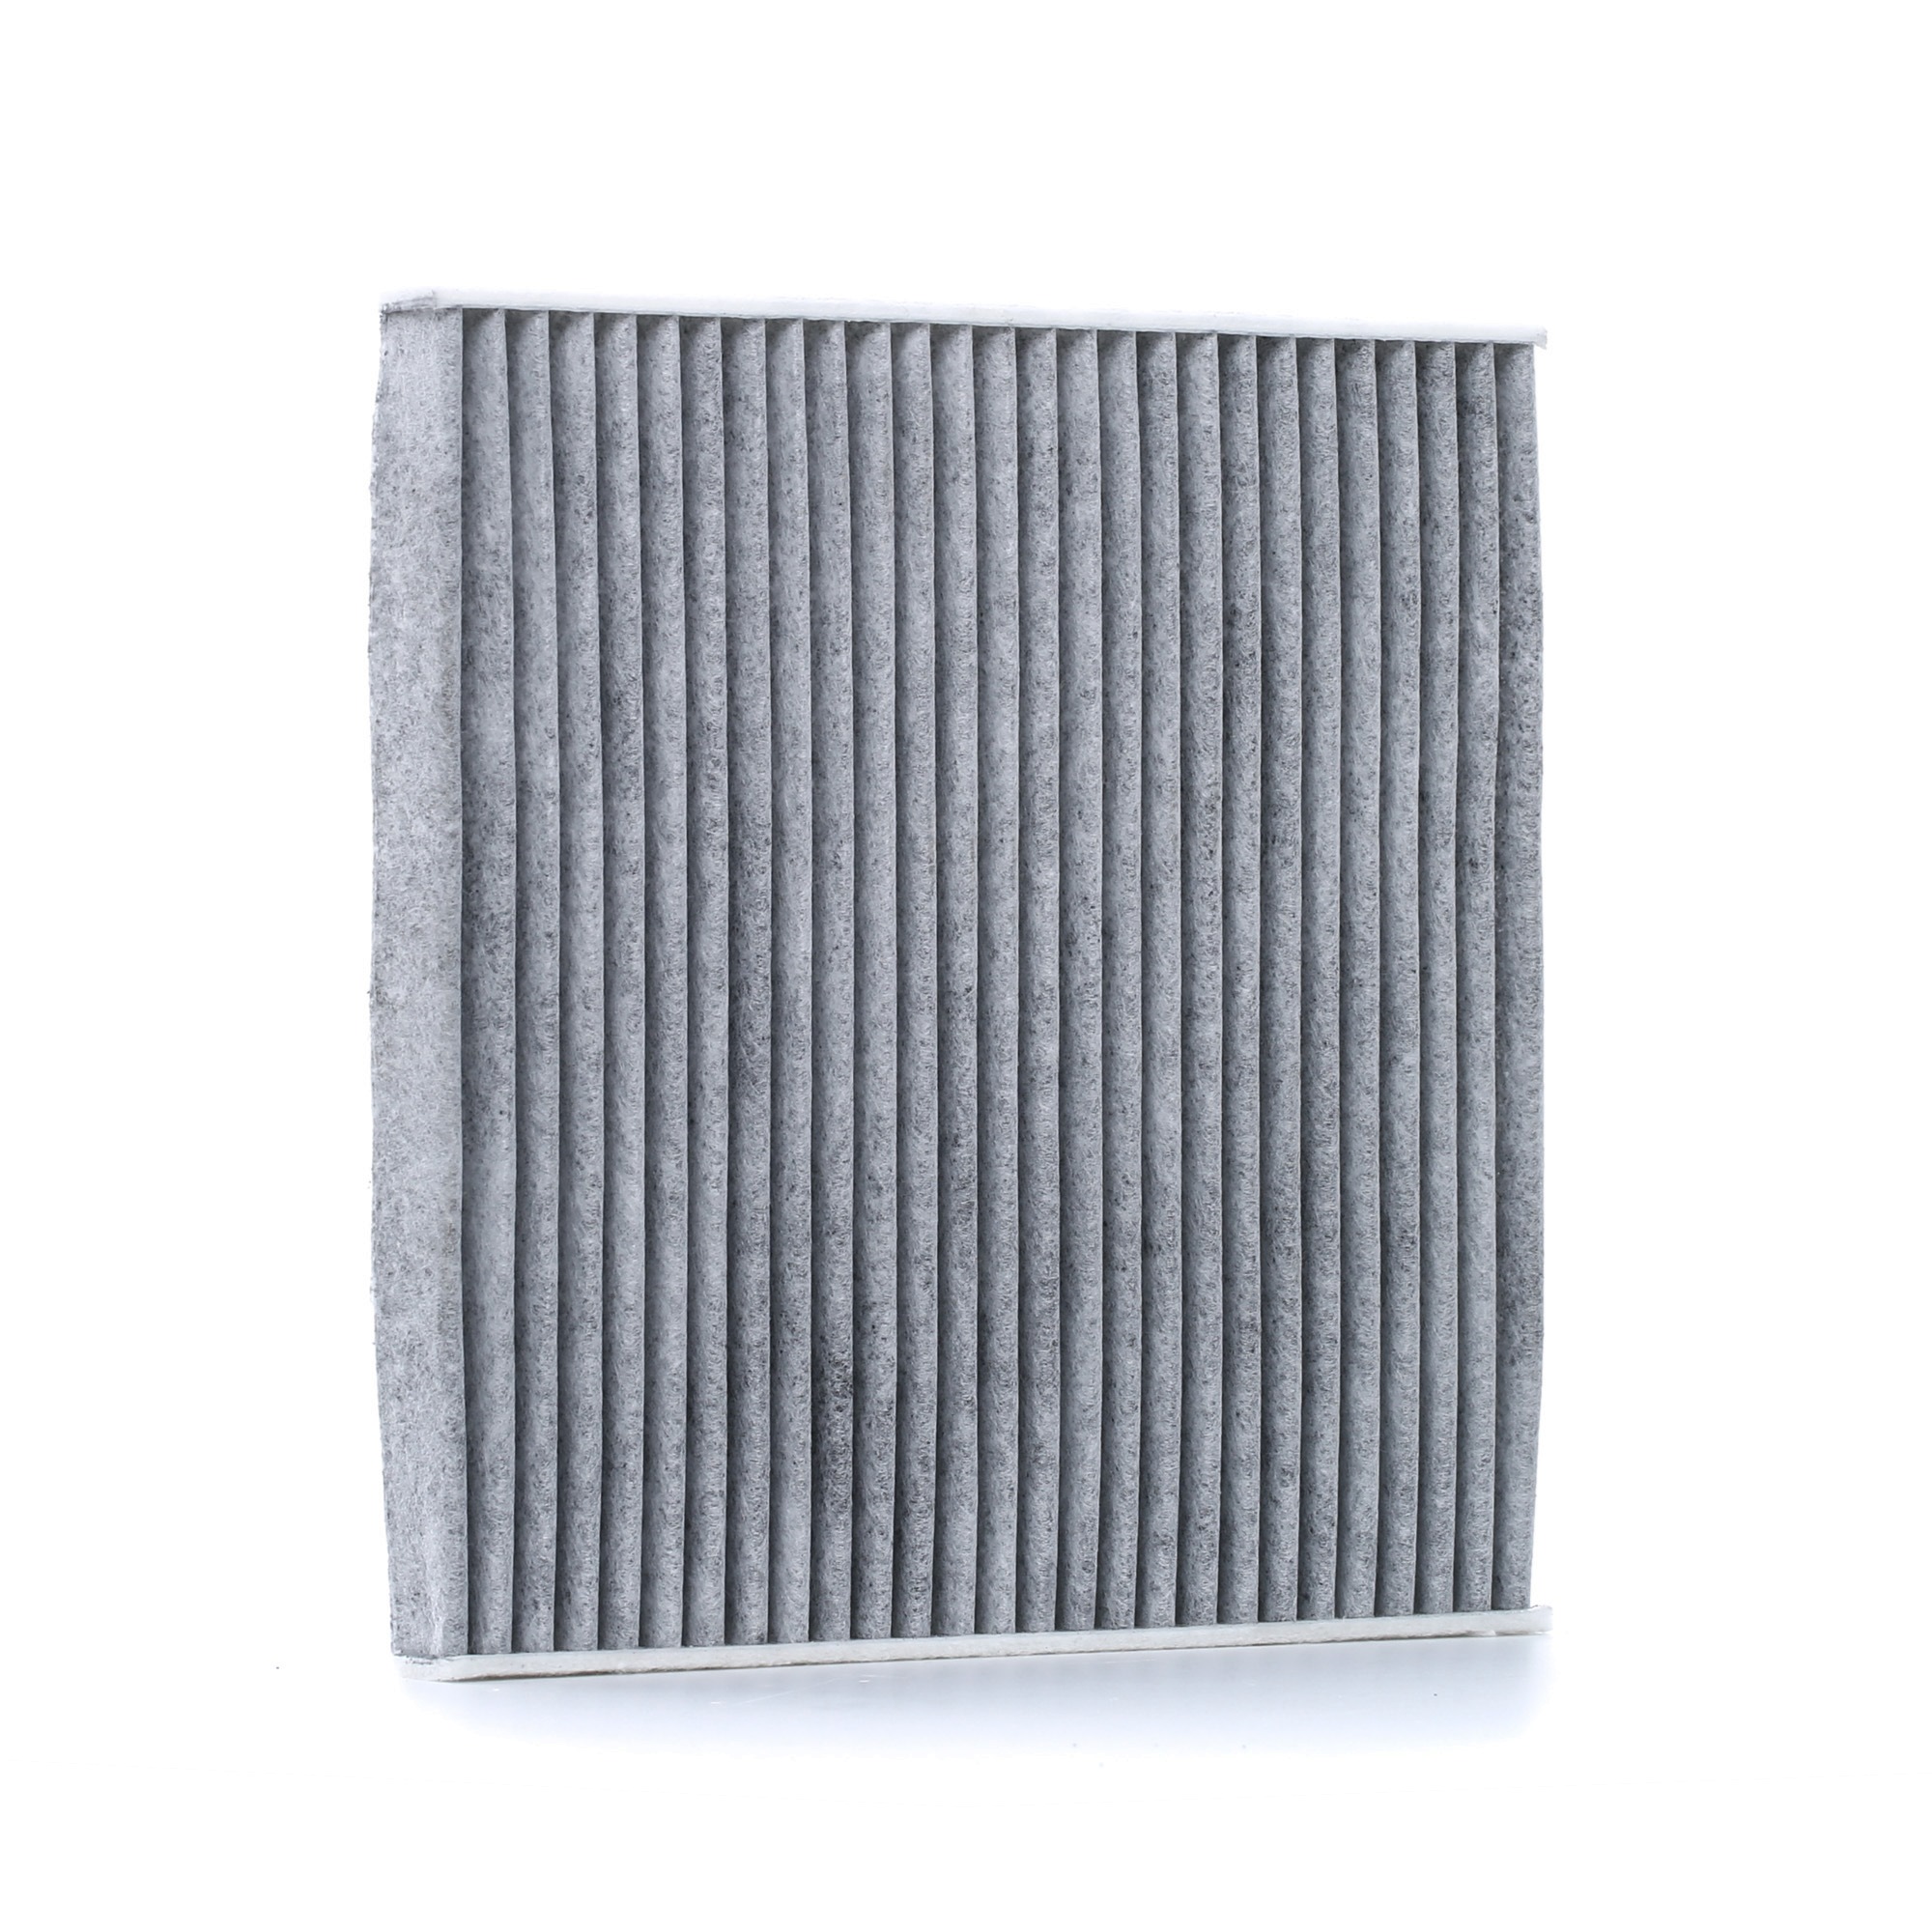 Toyota CARINA Air conditioning filter 9471176 MEYLE 30-12 320 0005 online buy